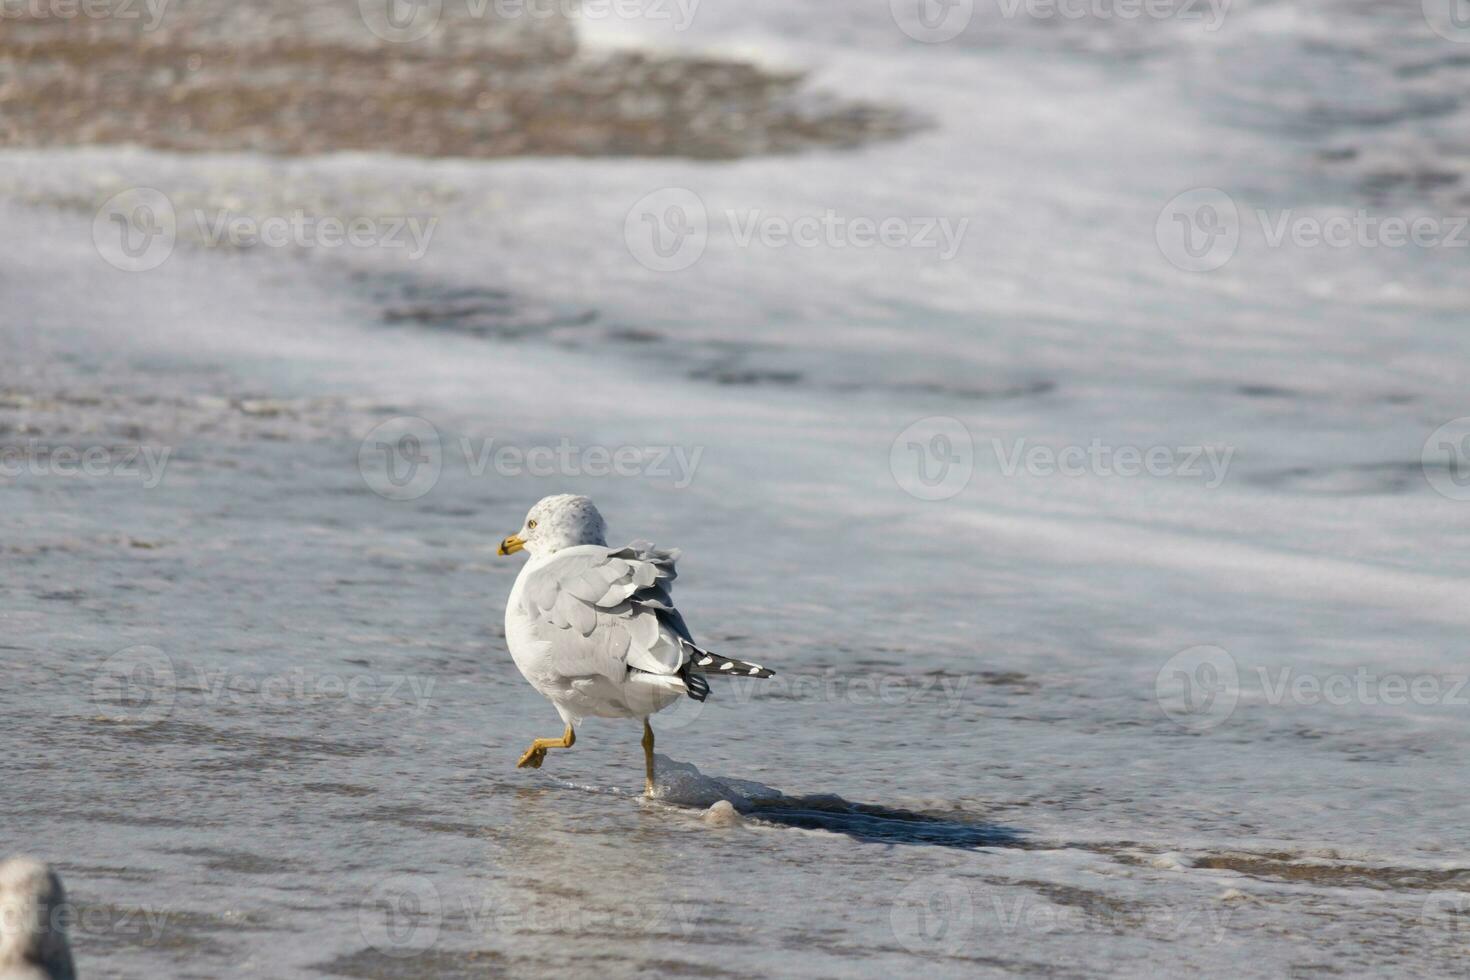 This large seagull is standing at the beach around the water in search of food. The grey, white, and black feathers of this shorebird stand out from the brown sand and ocean water. photo